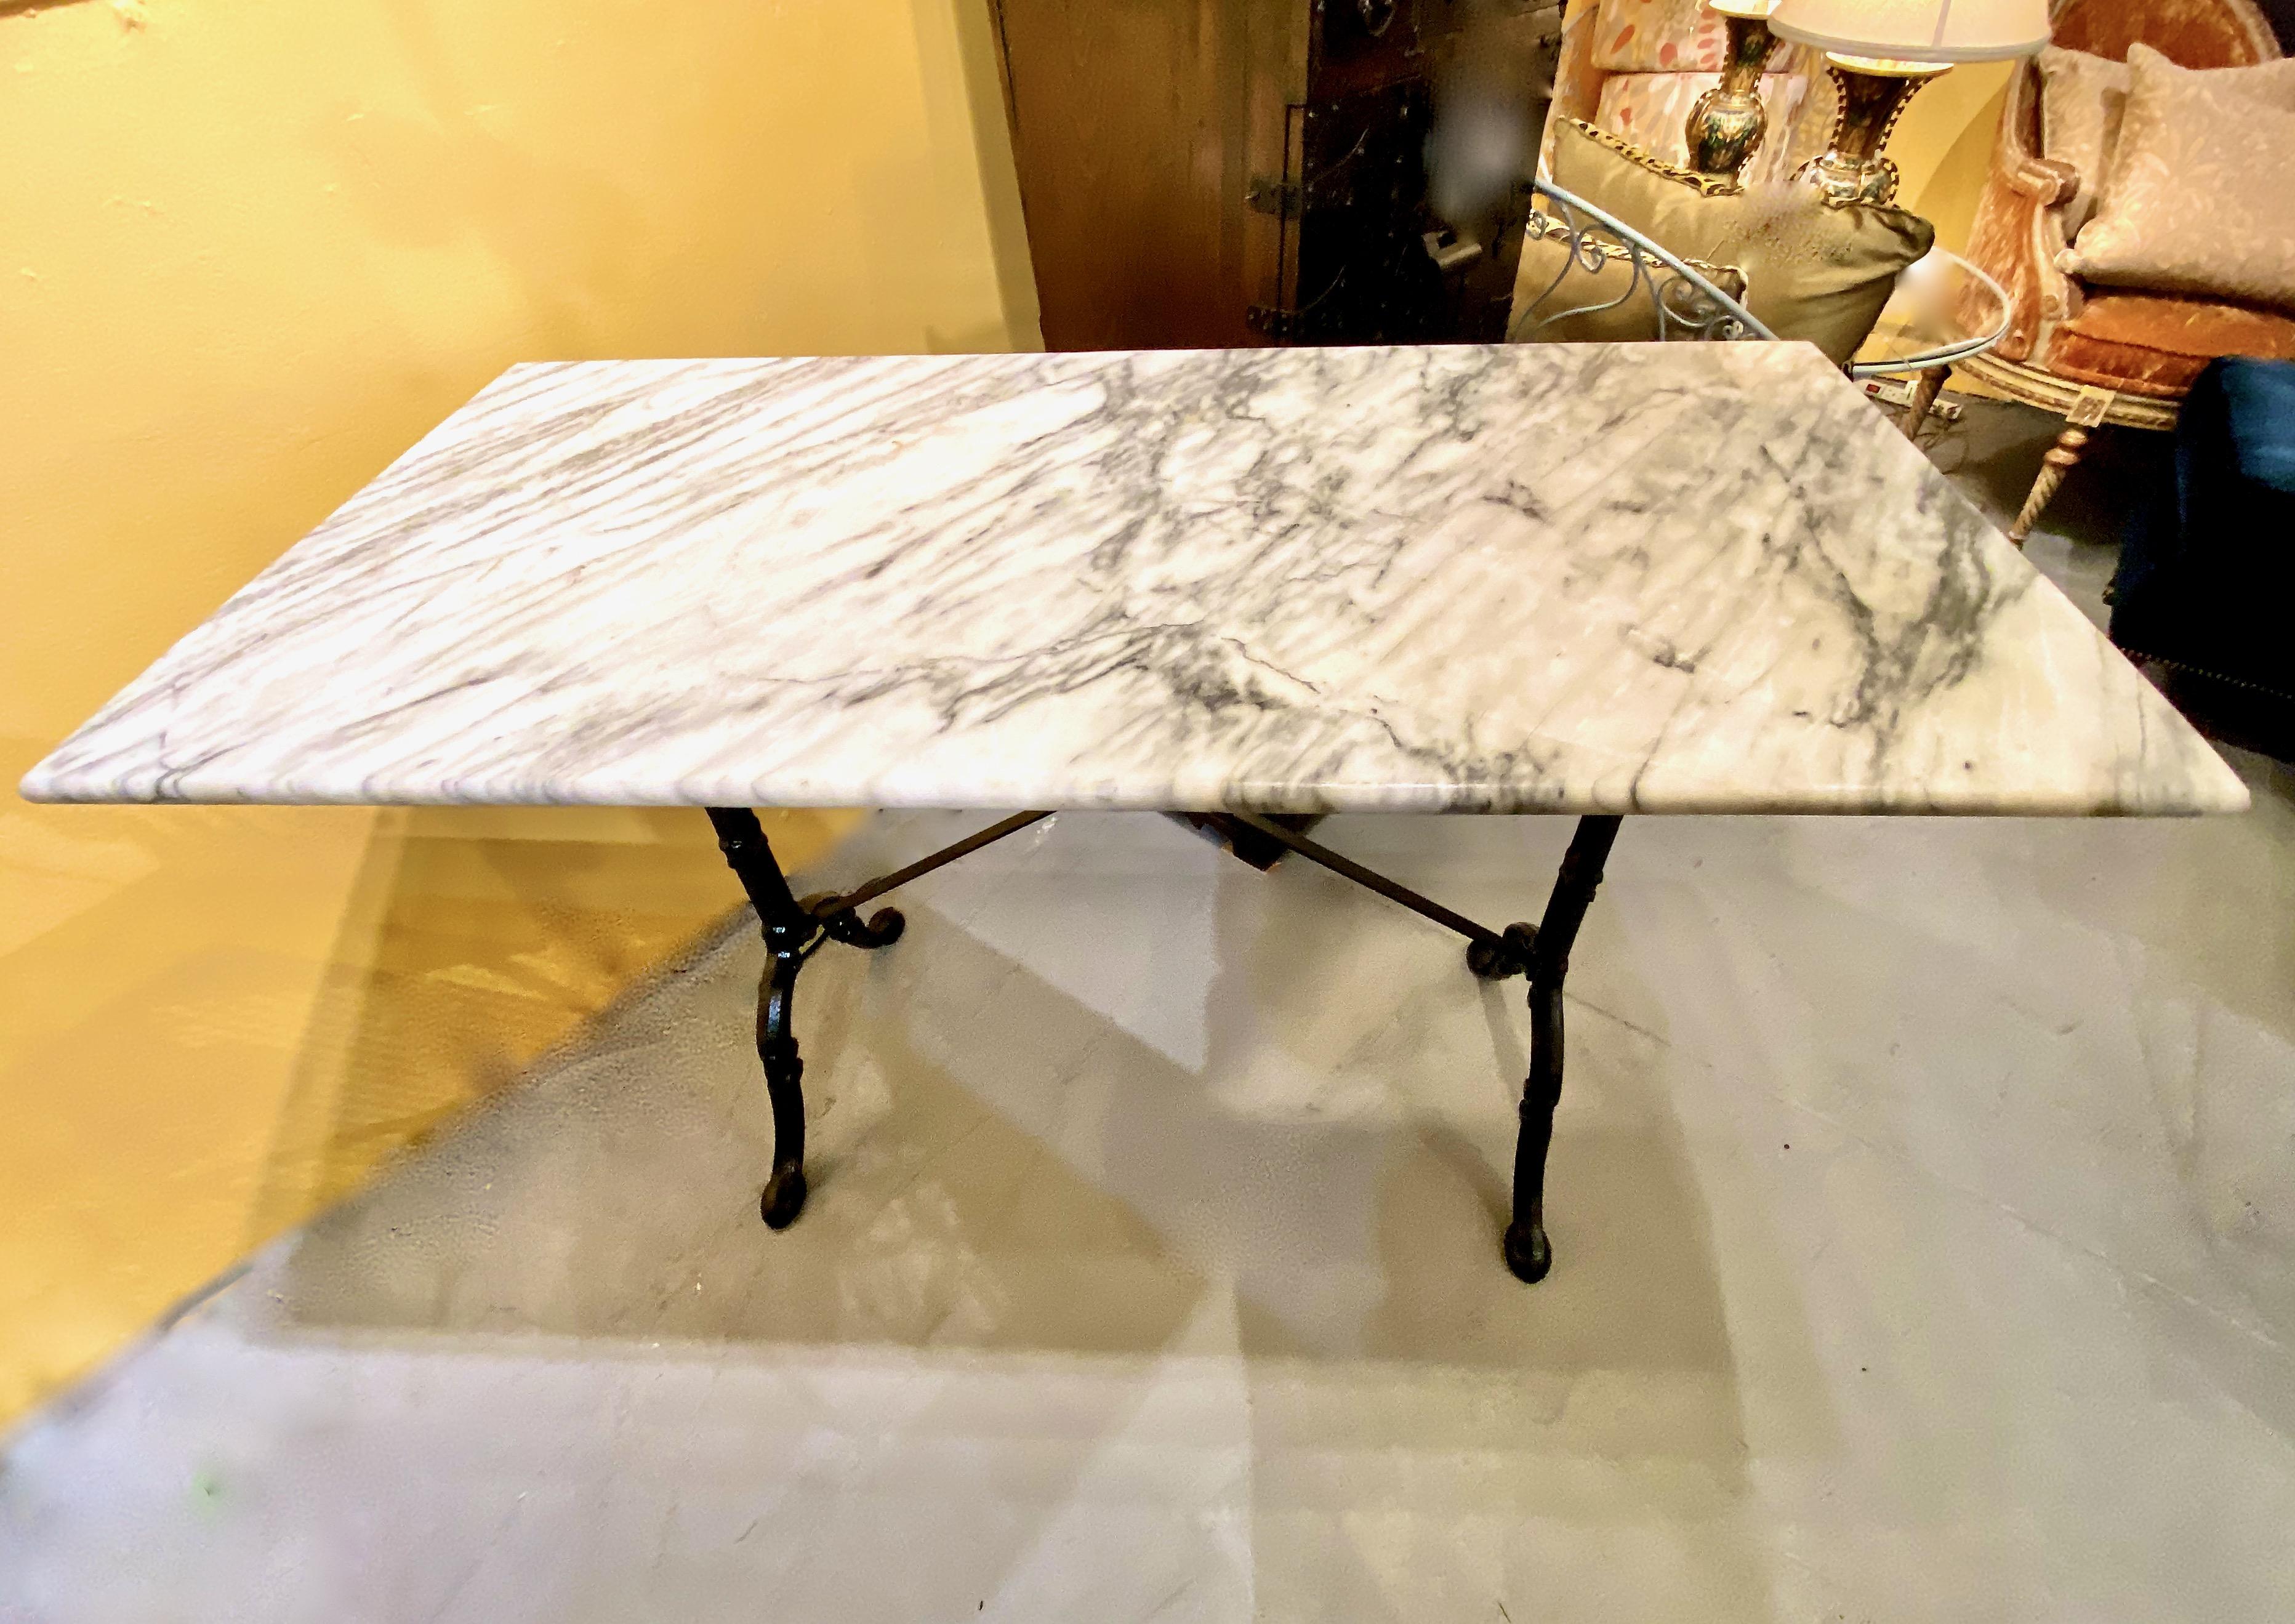 This is a superb example of an early 20th century antique French marble-top Bistro Table. The table is in overall very good condition and features a cast iron base and fine grey and white marble top. The generous size of the table allows it to adapt